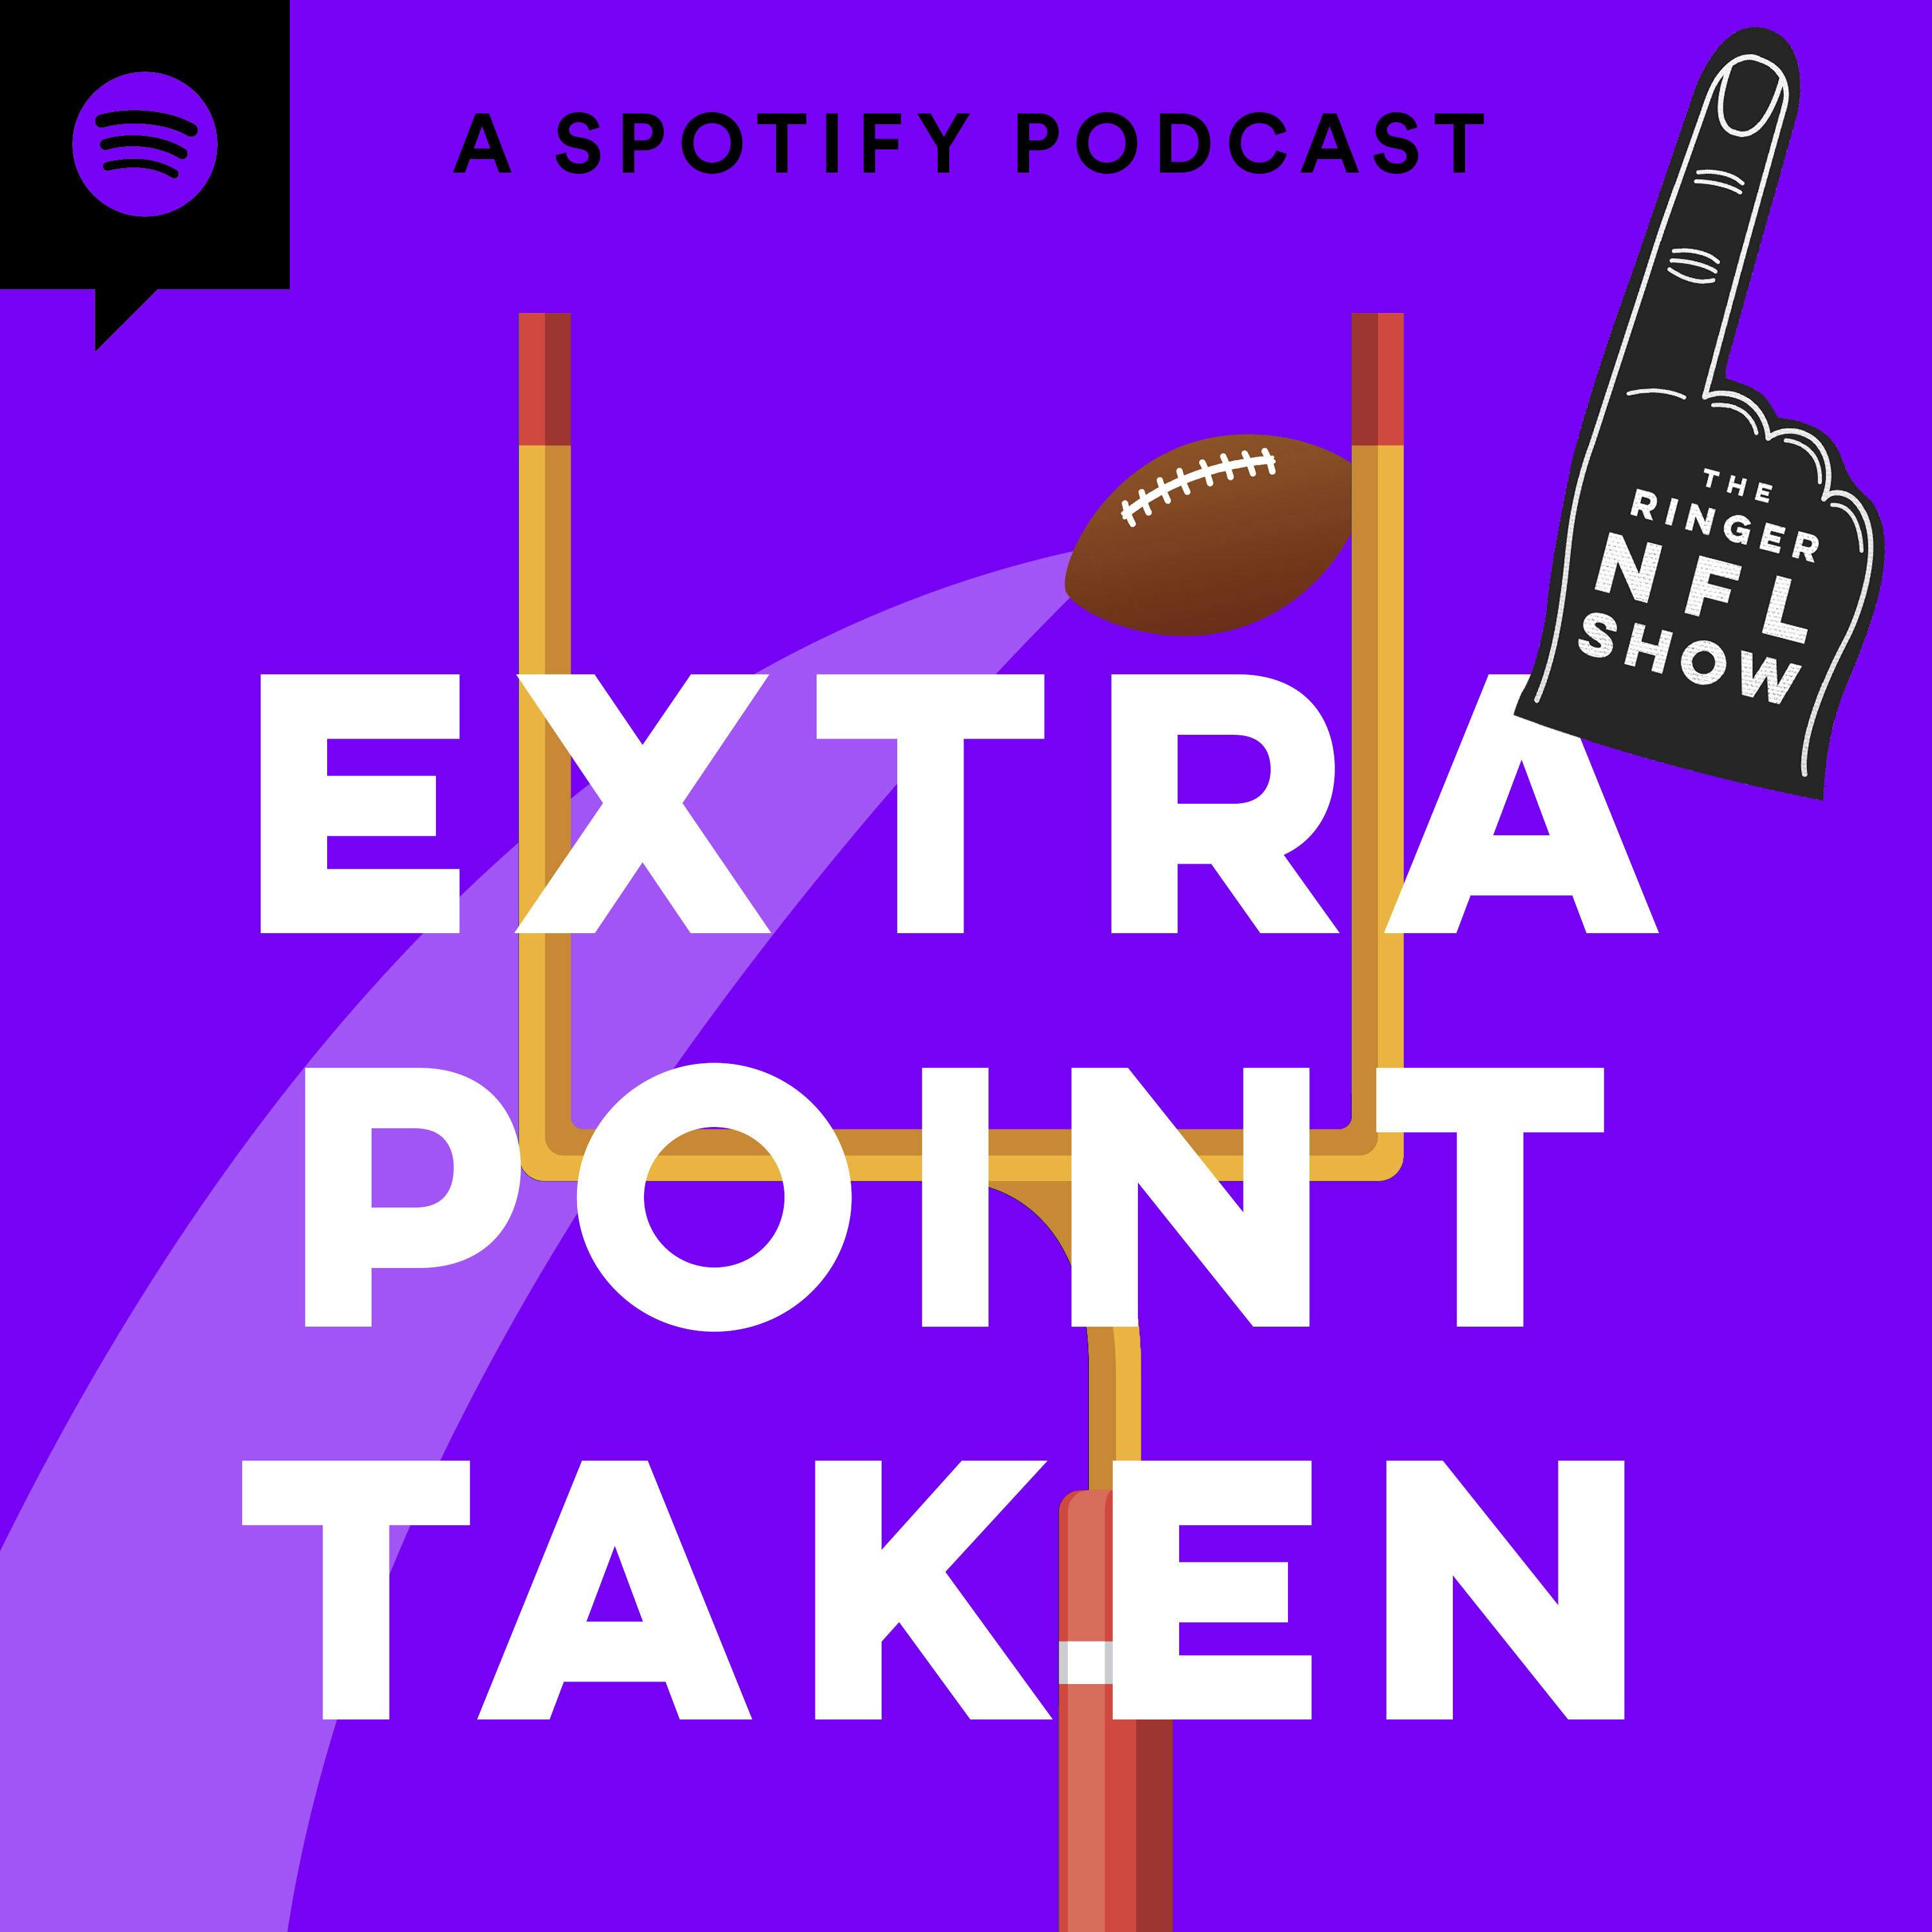 Russell Wilson’s Next Stop, the Vikings’ QB Plan, Lions Trade Buzz, and More! | Extra Point Taken